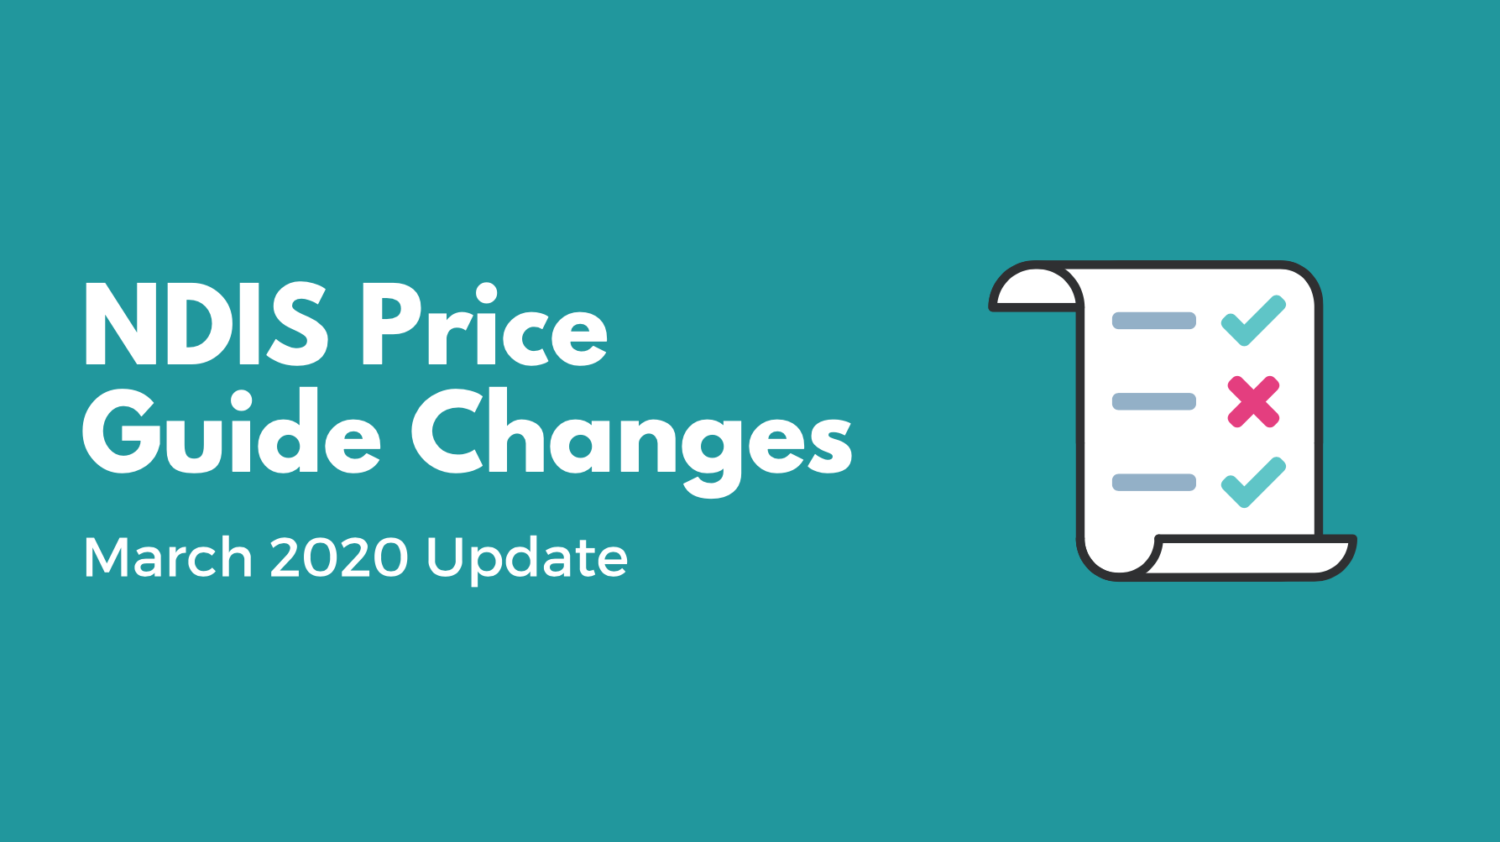 NDIS price guide changes* Optimal Therapy not making any changes